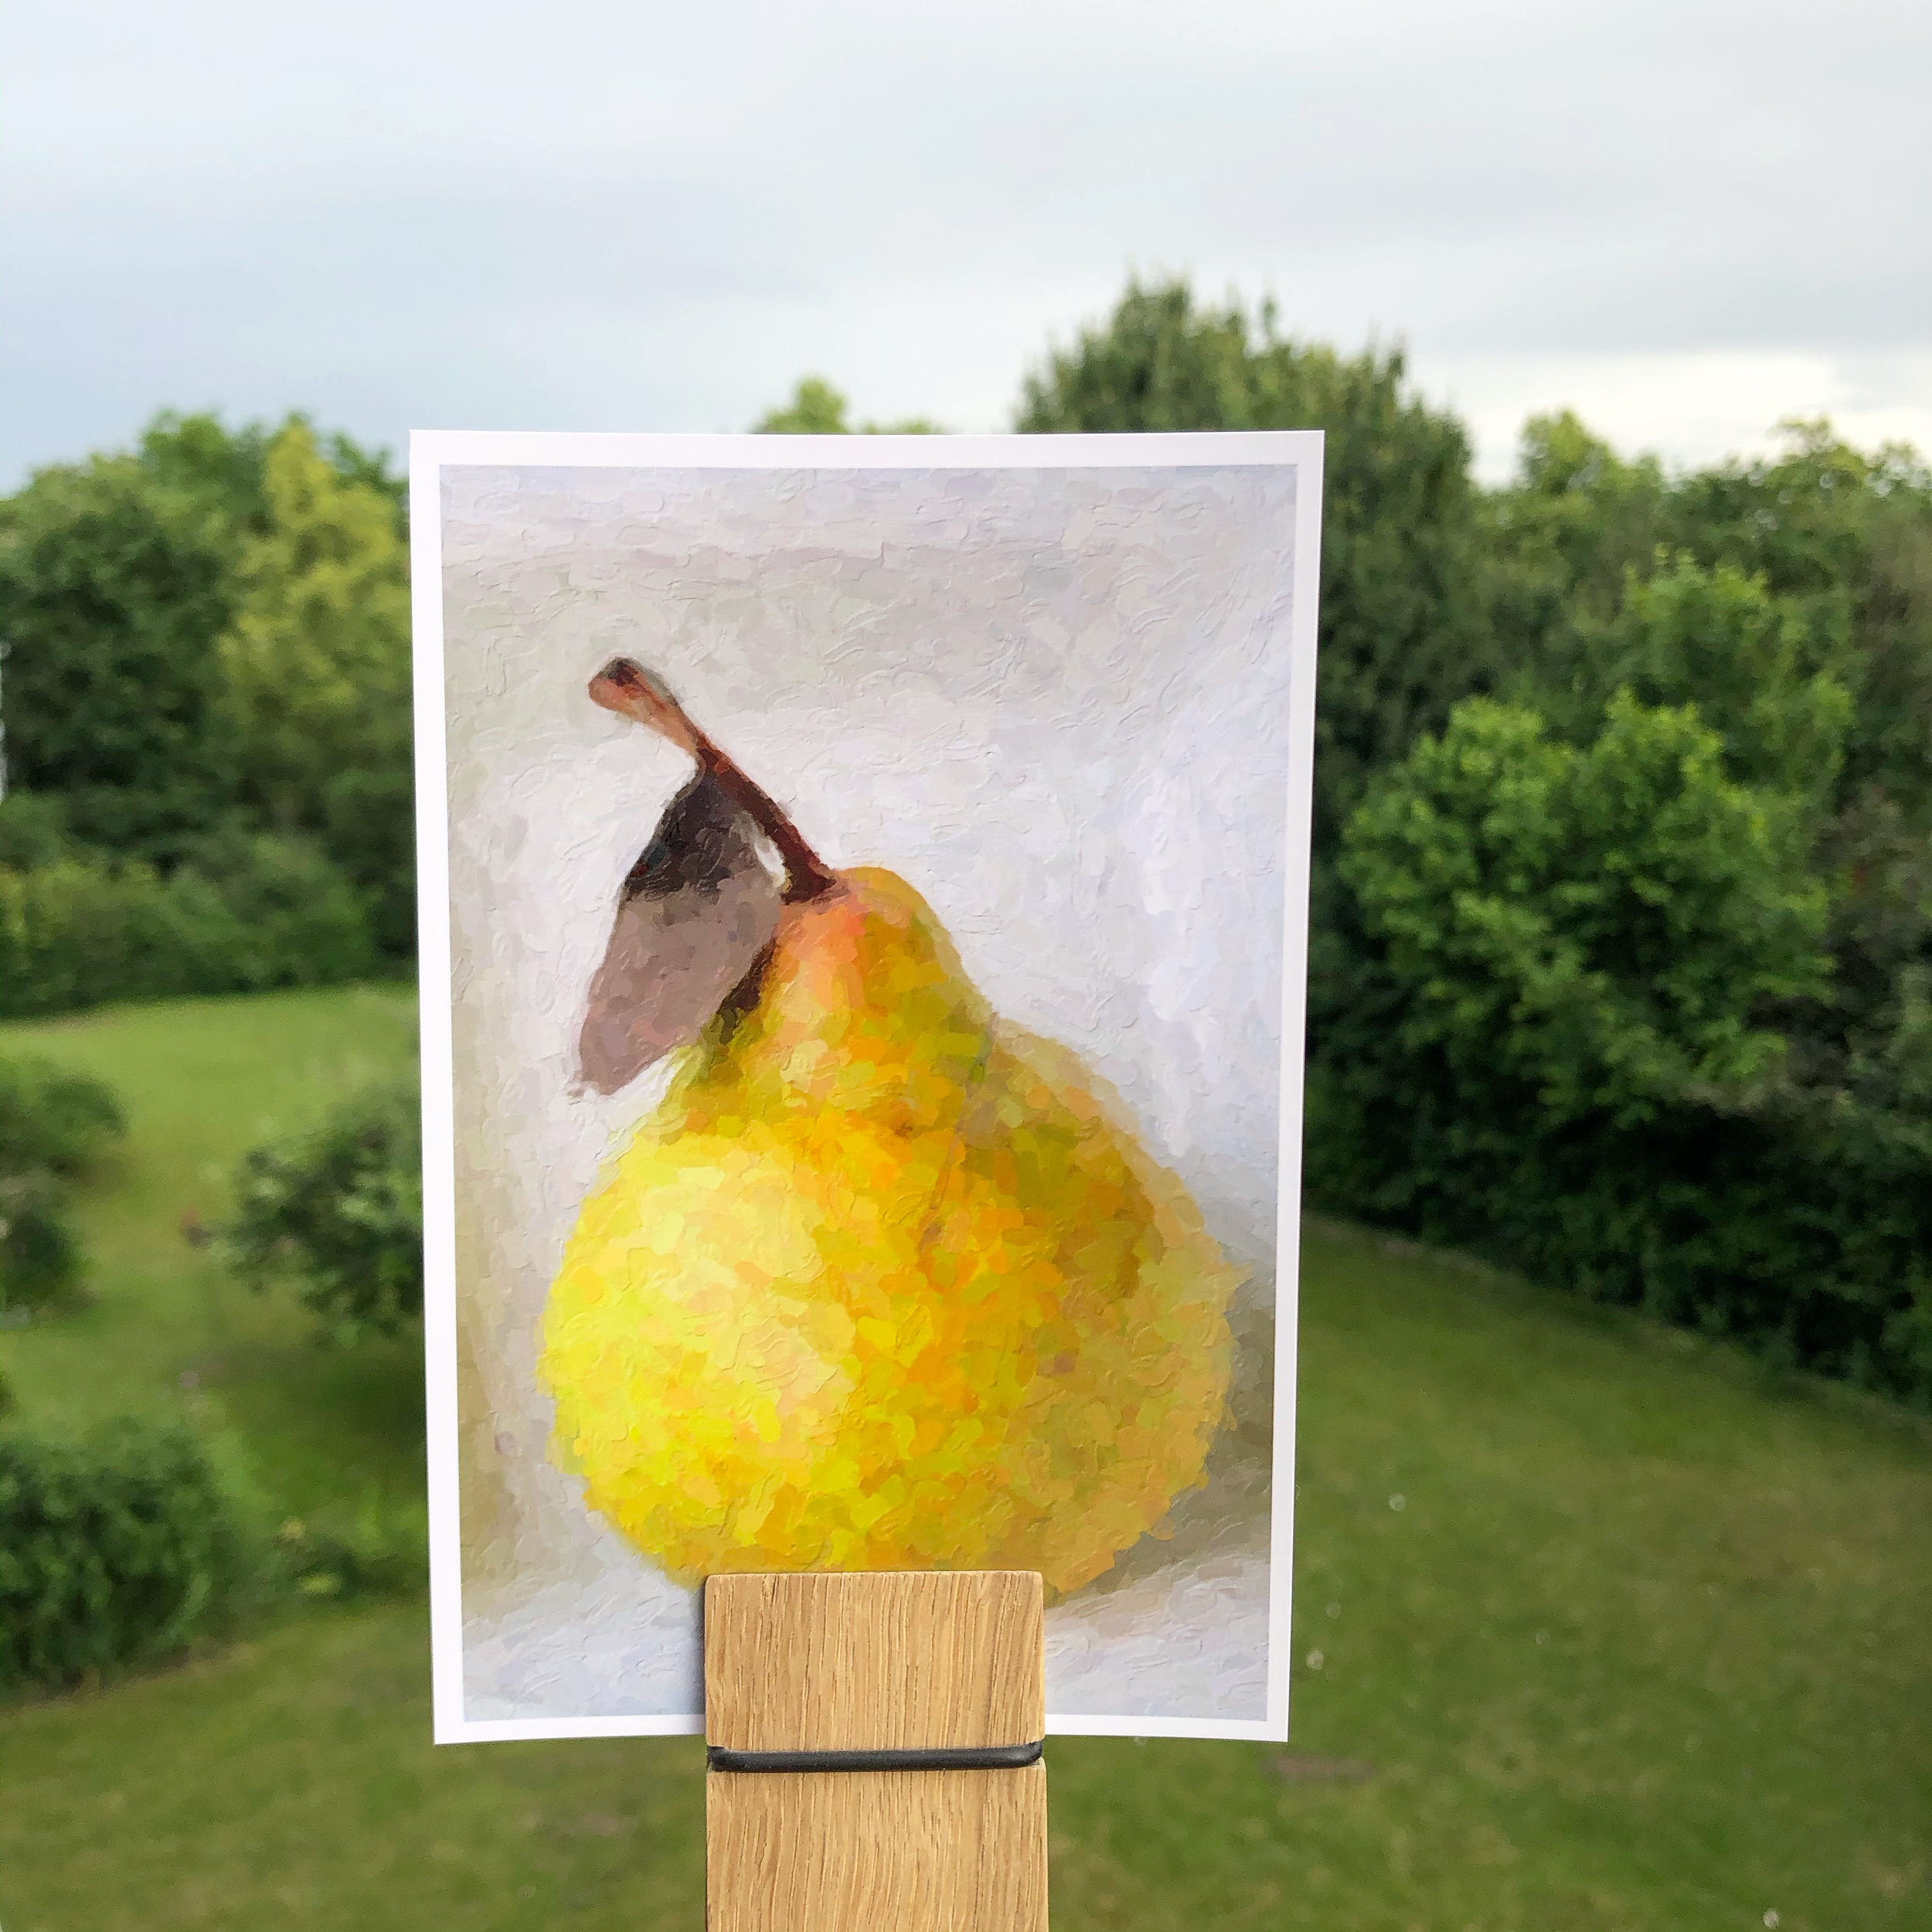 Pear in the wind